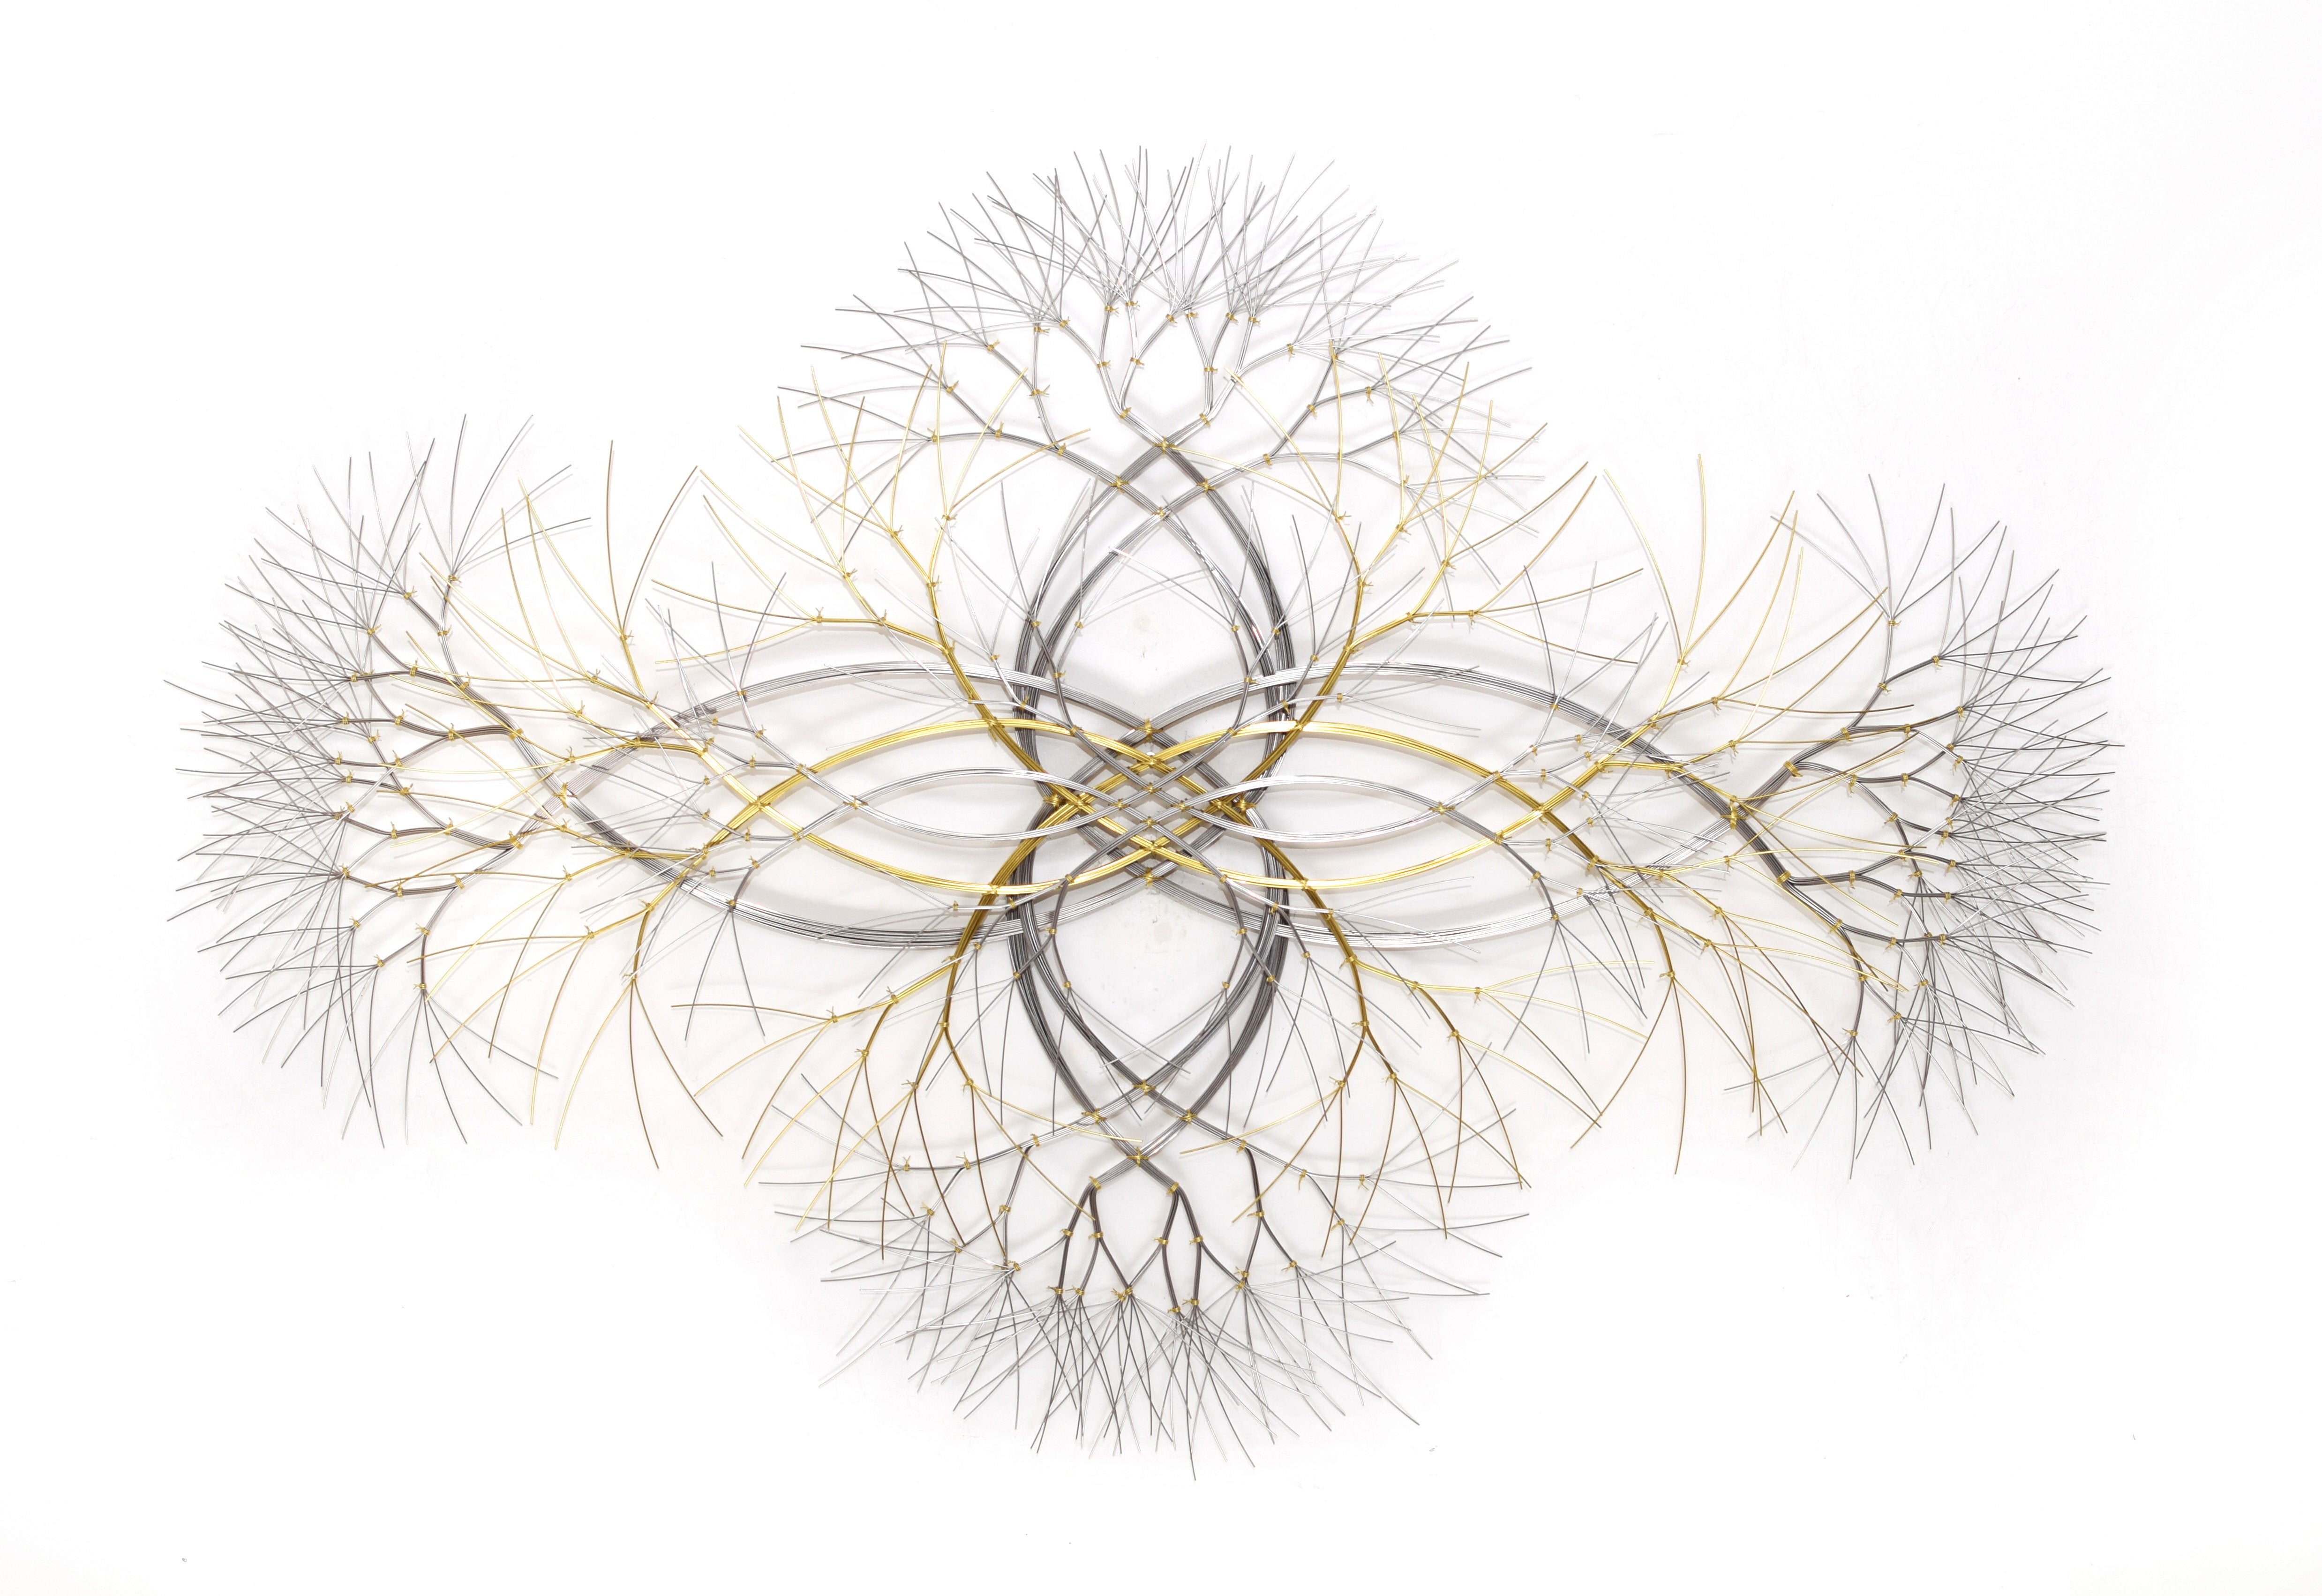 54"x37" Metal Wall Sculpture in Brass and Stainless Steel. #588 Available now